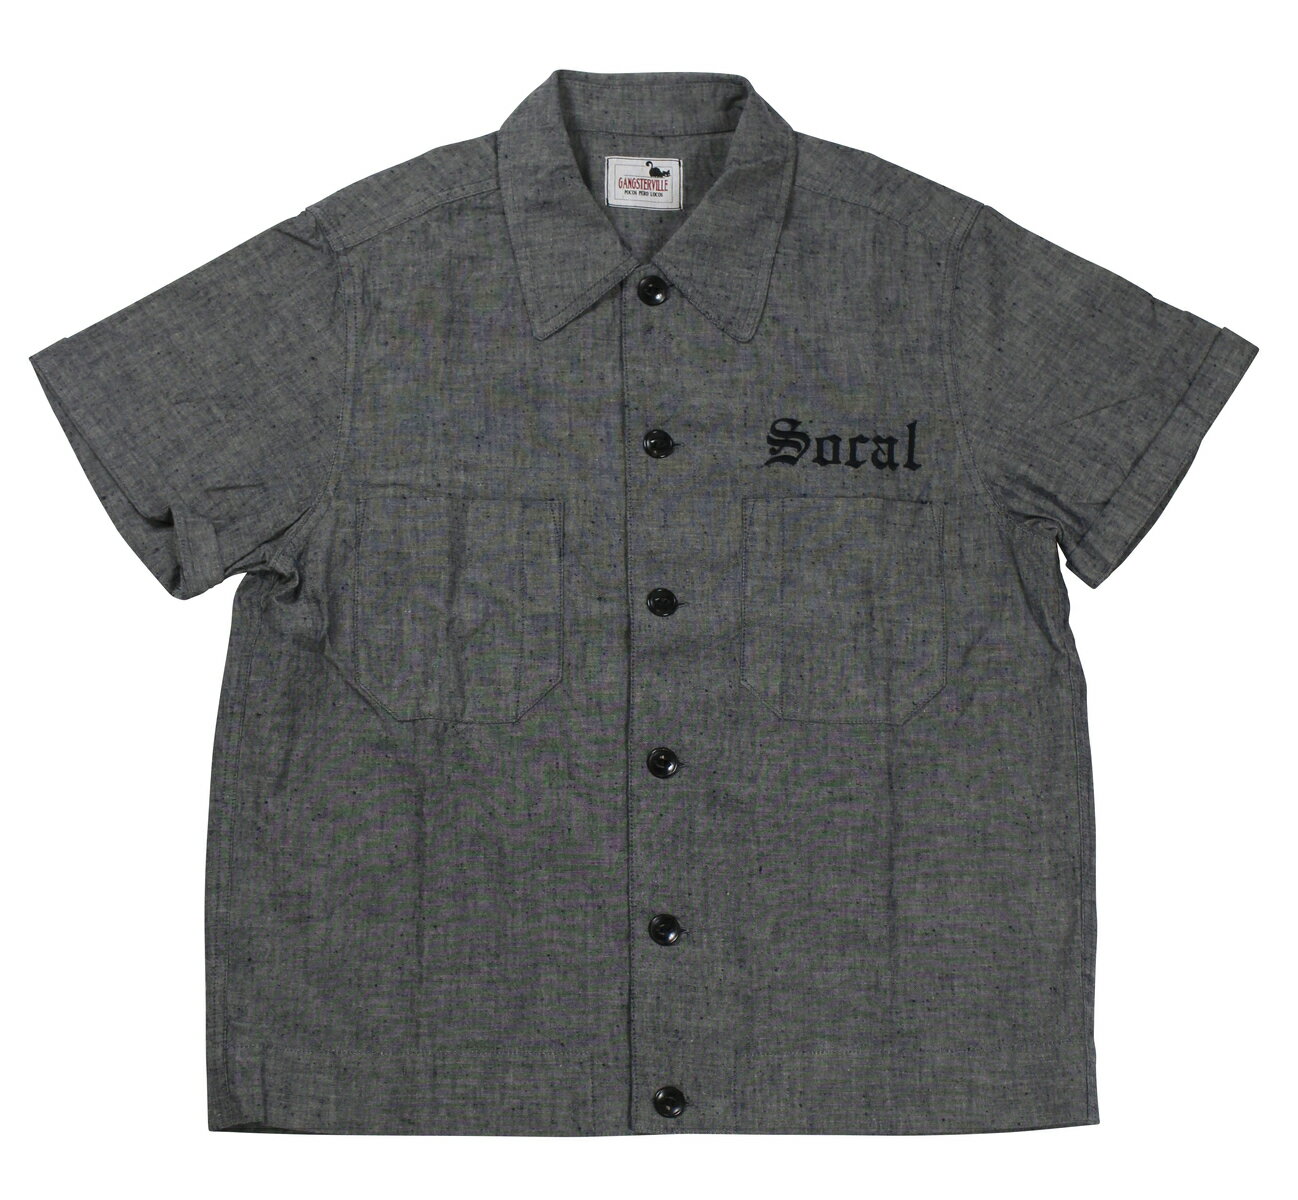 GANGSTERVILLE -SOCAL - S/S SLICK SHIRTS- GRAY size.S,M,L,XL